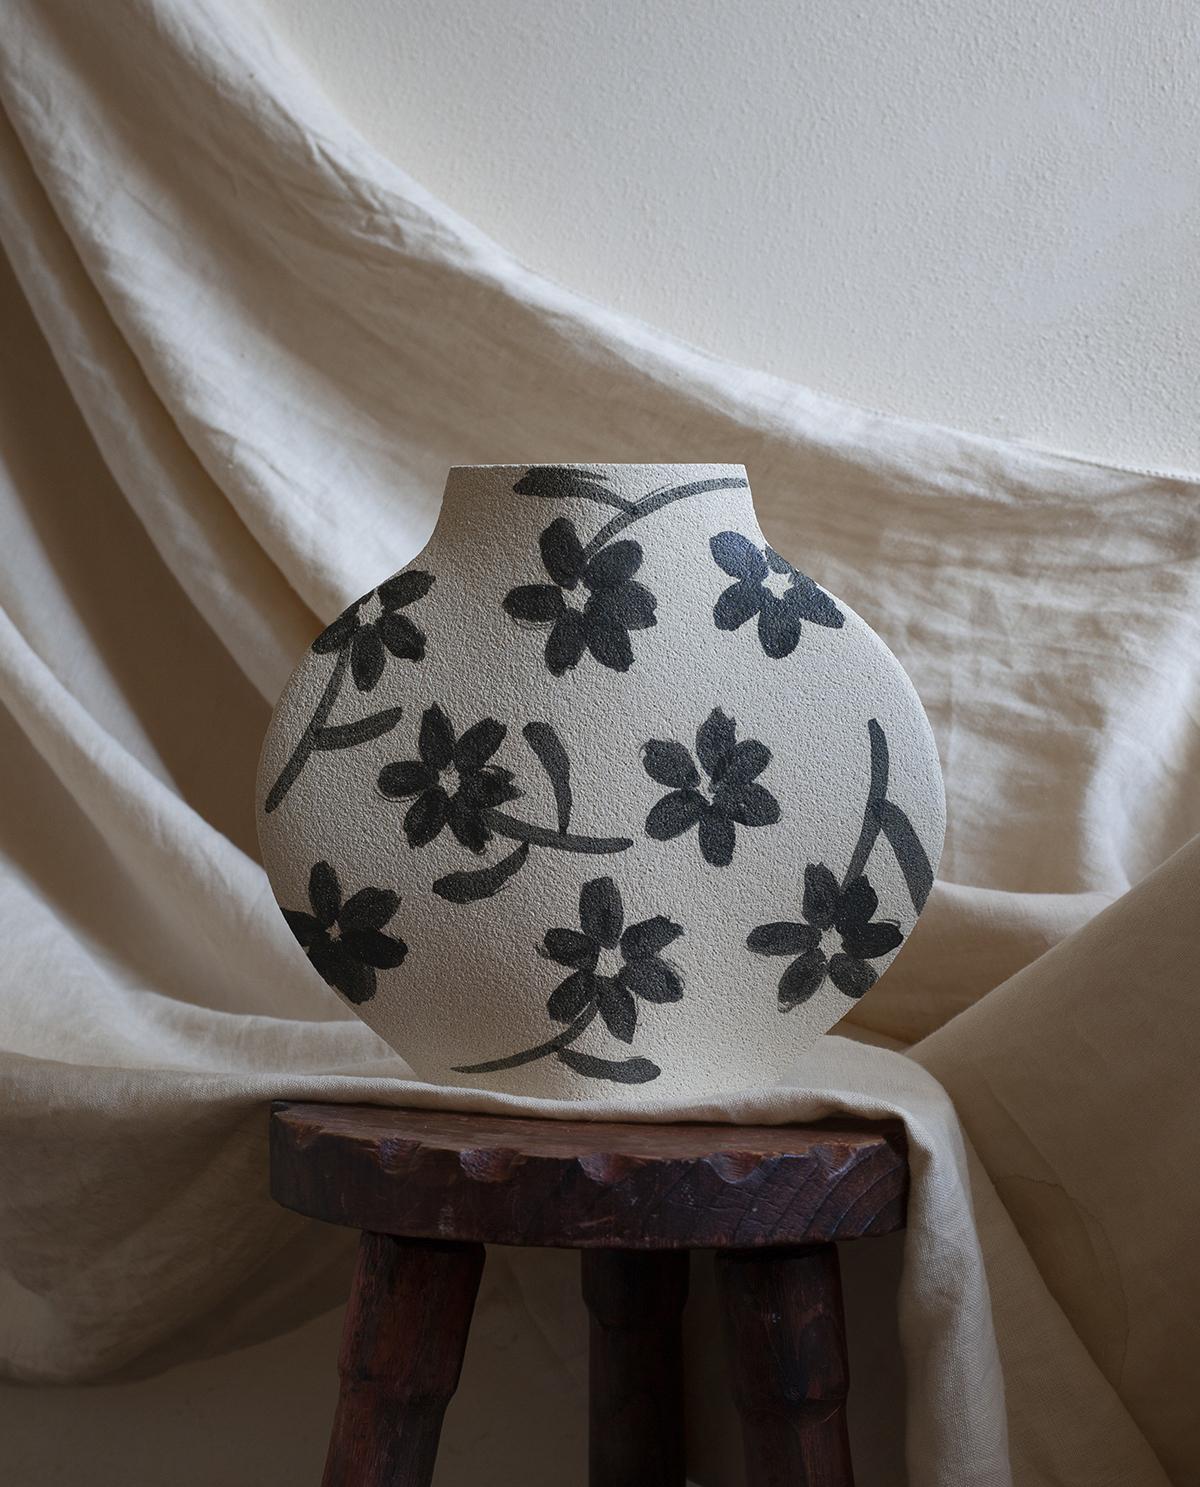 21st Century 'Flowers Pattern' Vase in White Ceramic, Hand-Crafted in France In New Condition For Sale In Marchaux-Chaudefontaine, FR